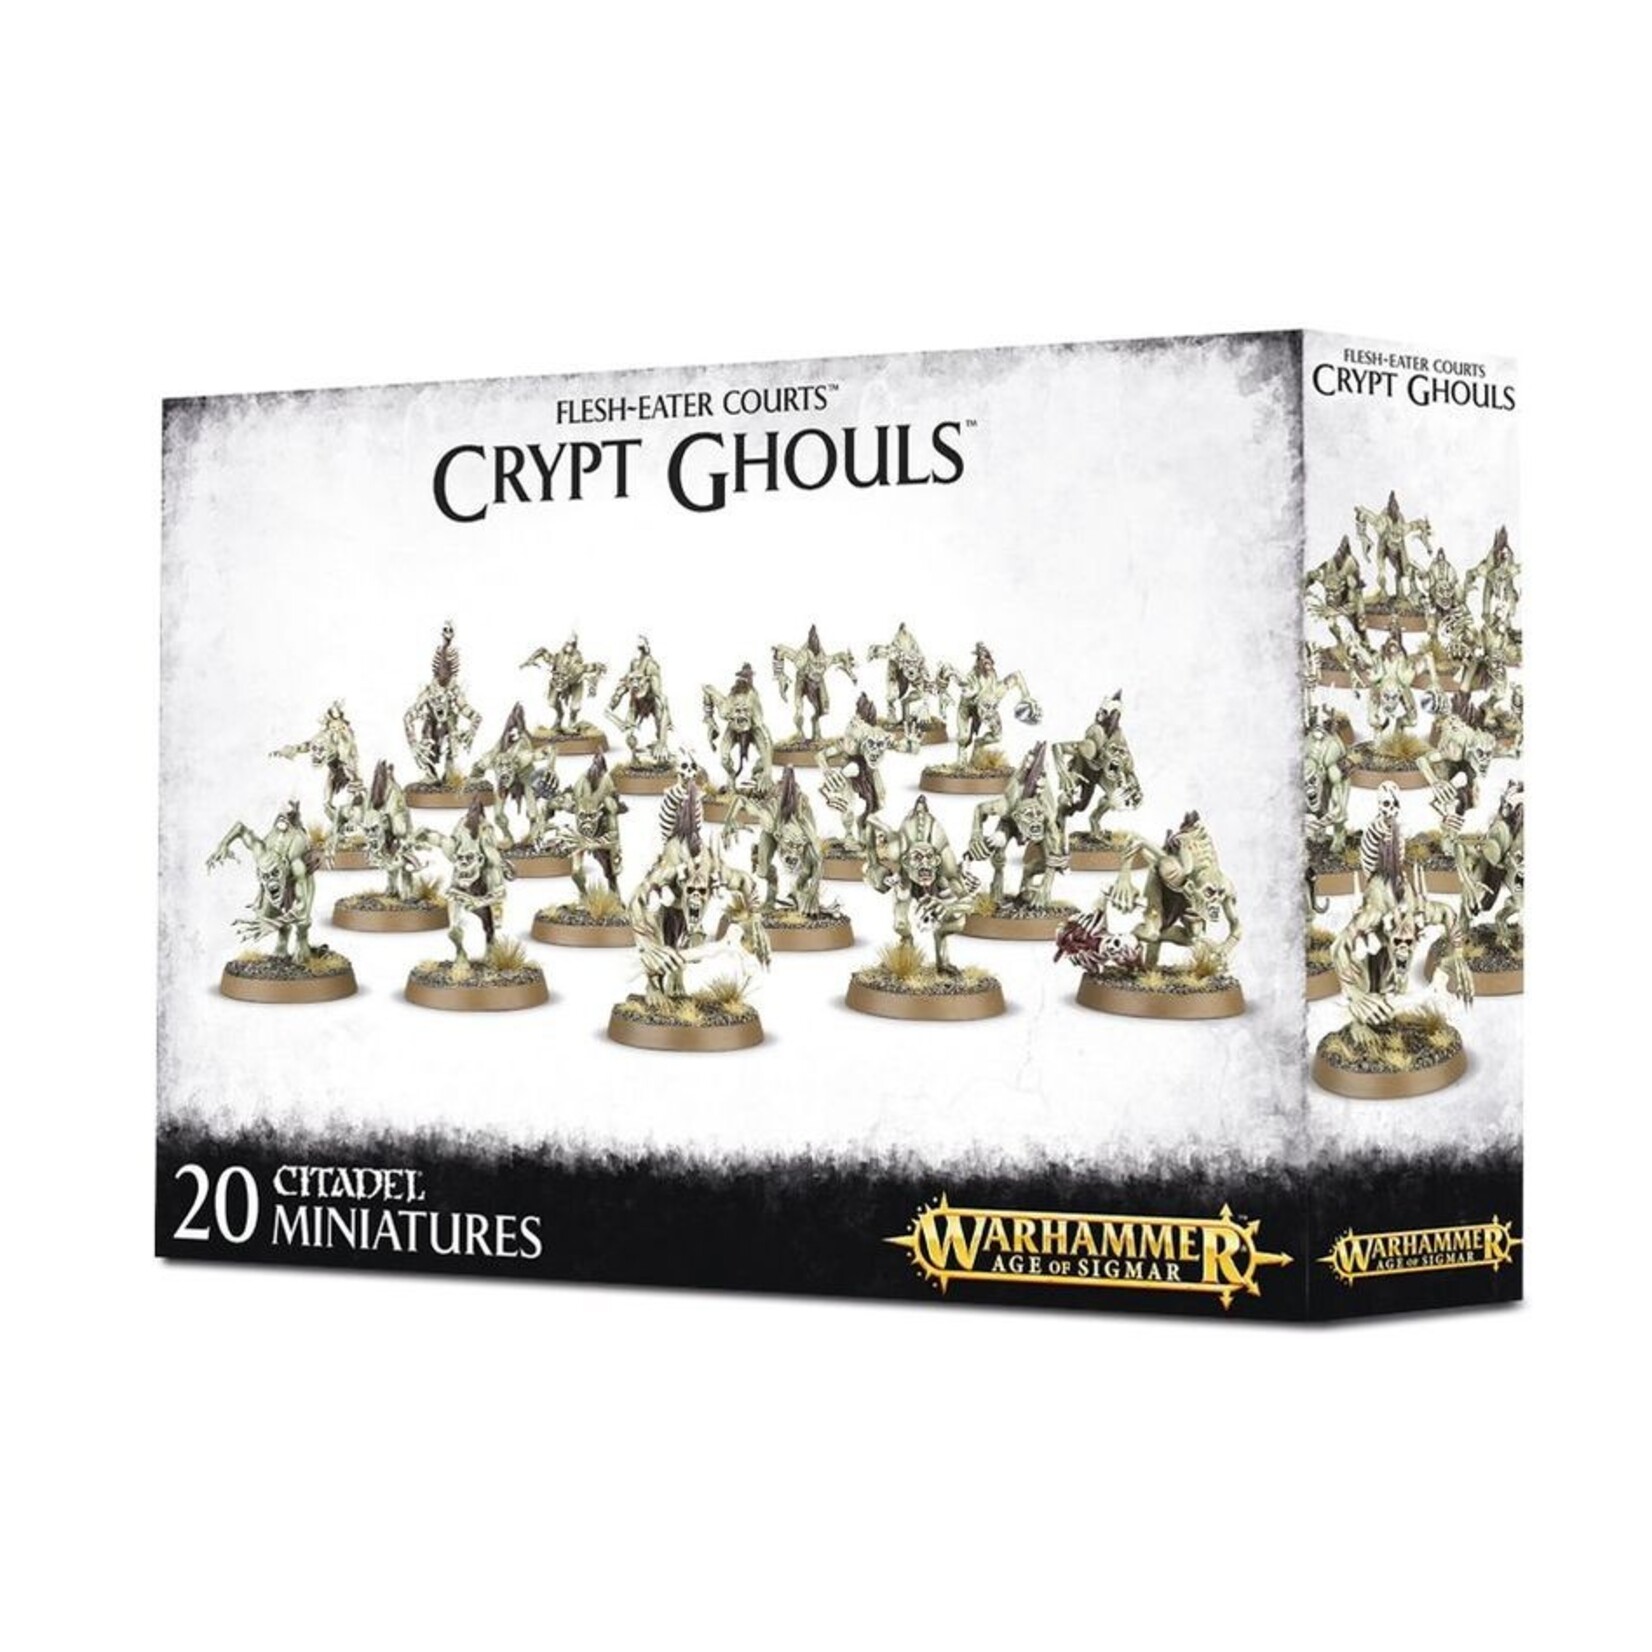 Warhammer Flesh-Eater: Courts Crypt Ghouls